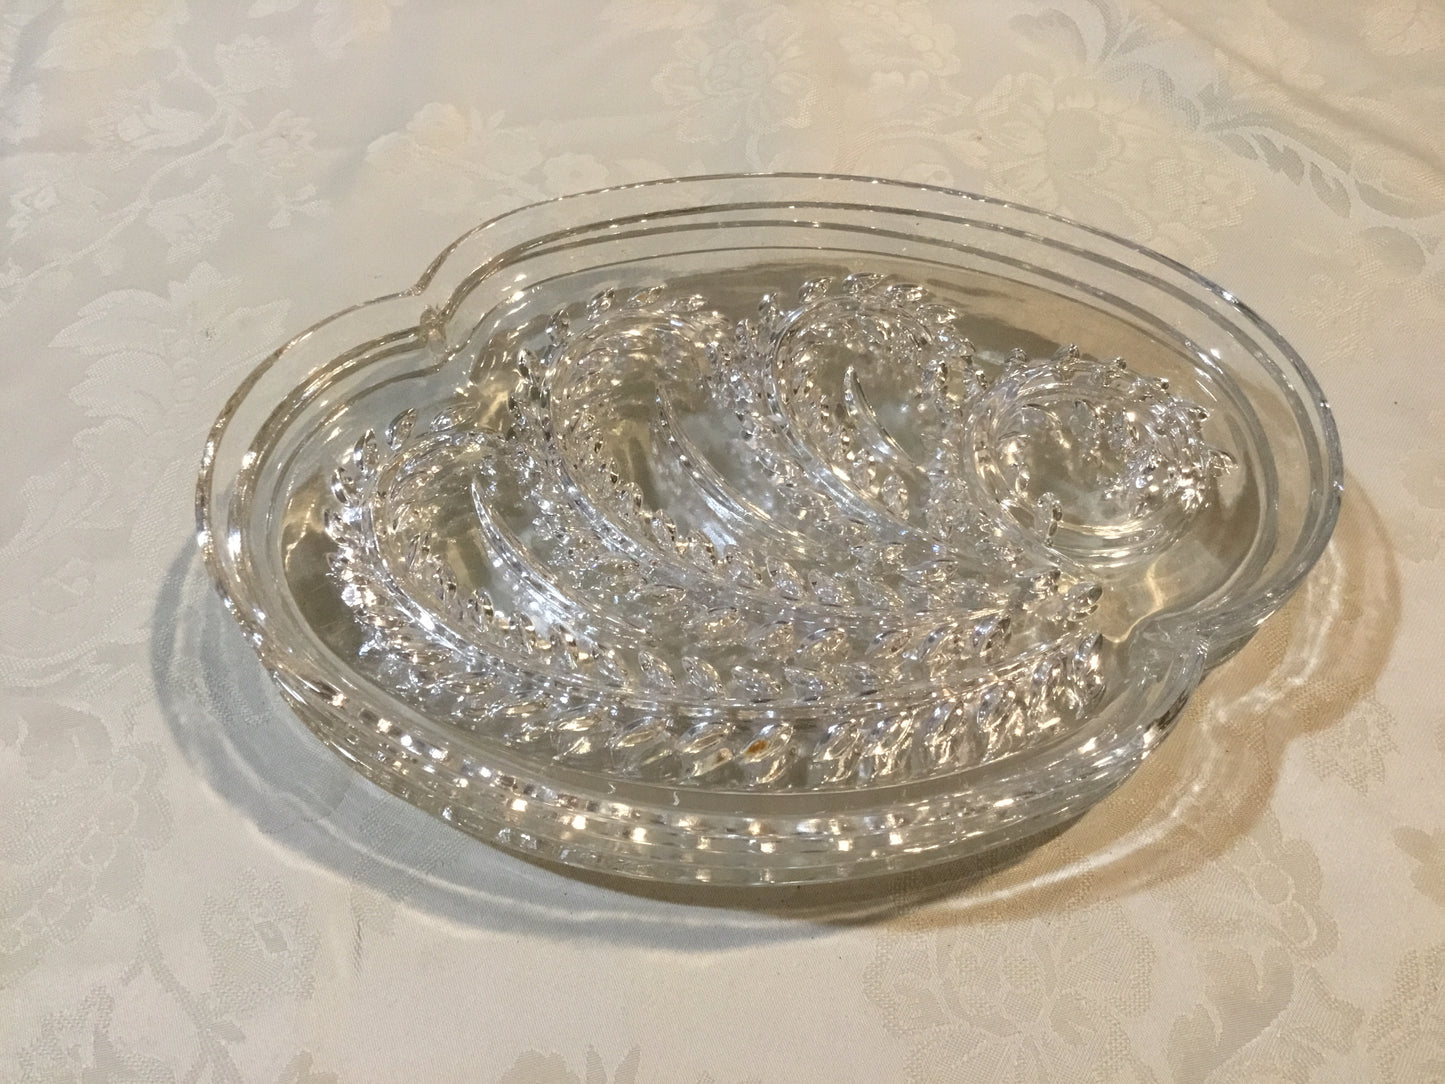 Homestead Snack Plates by Federal Glass, Set of 4 - no cups